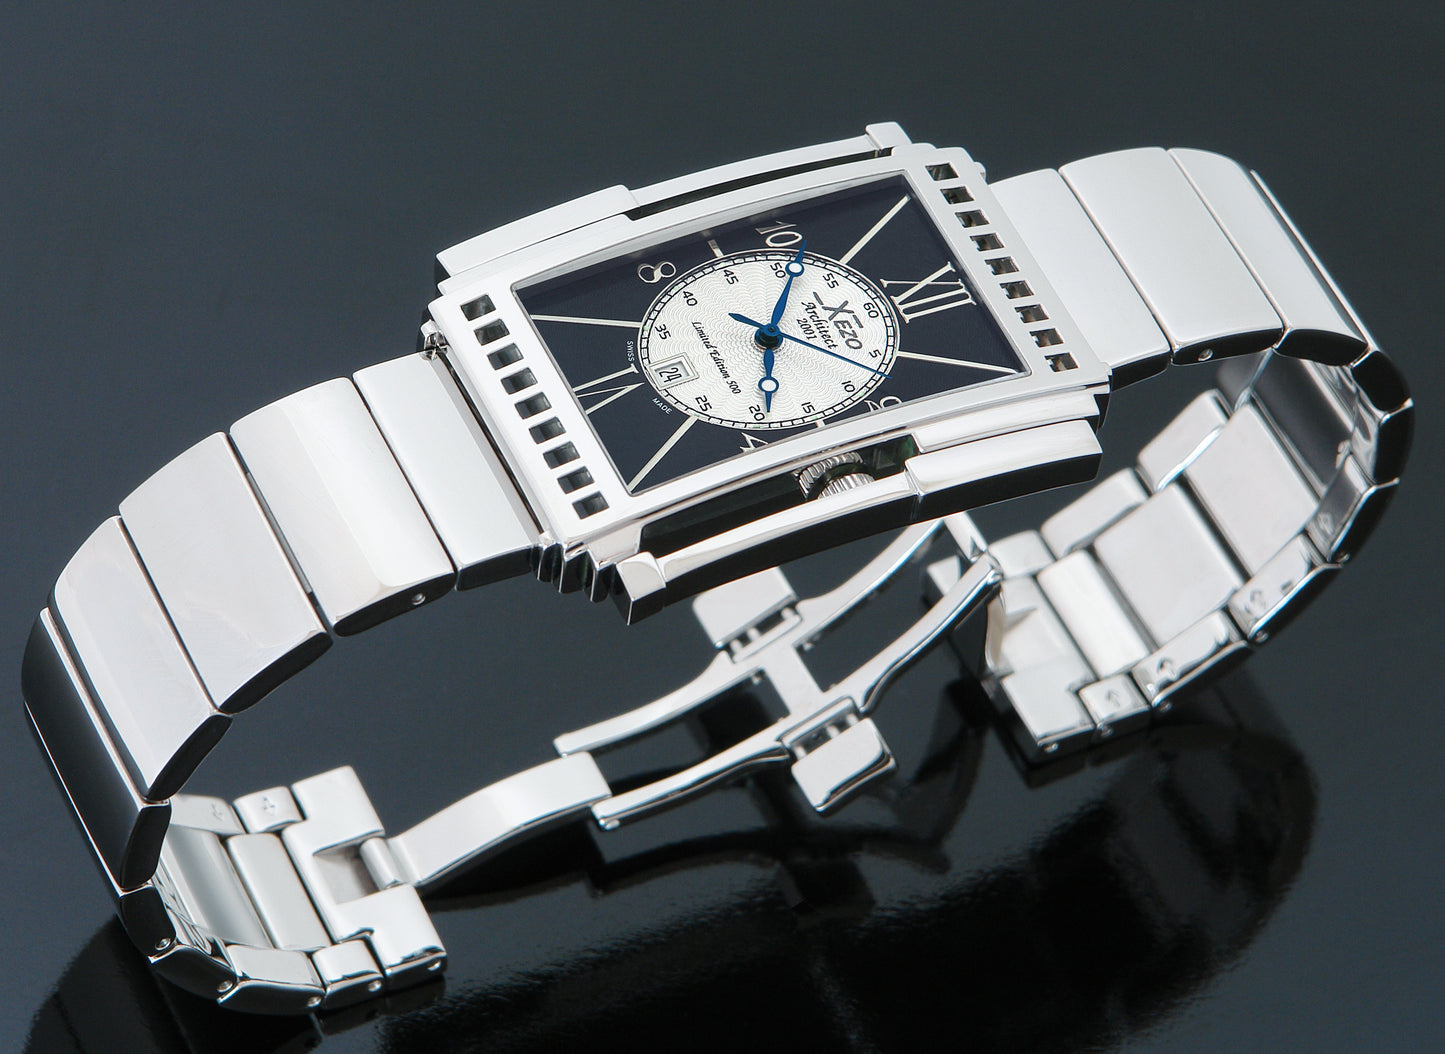 Xezo - Angled view of the front of the Architect 2001 SB watch with stainless steel bracelet and clasp